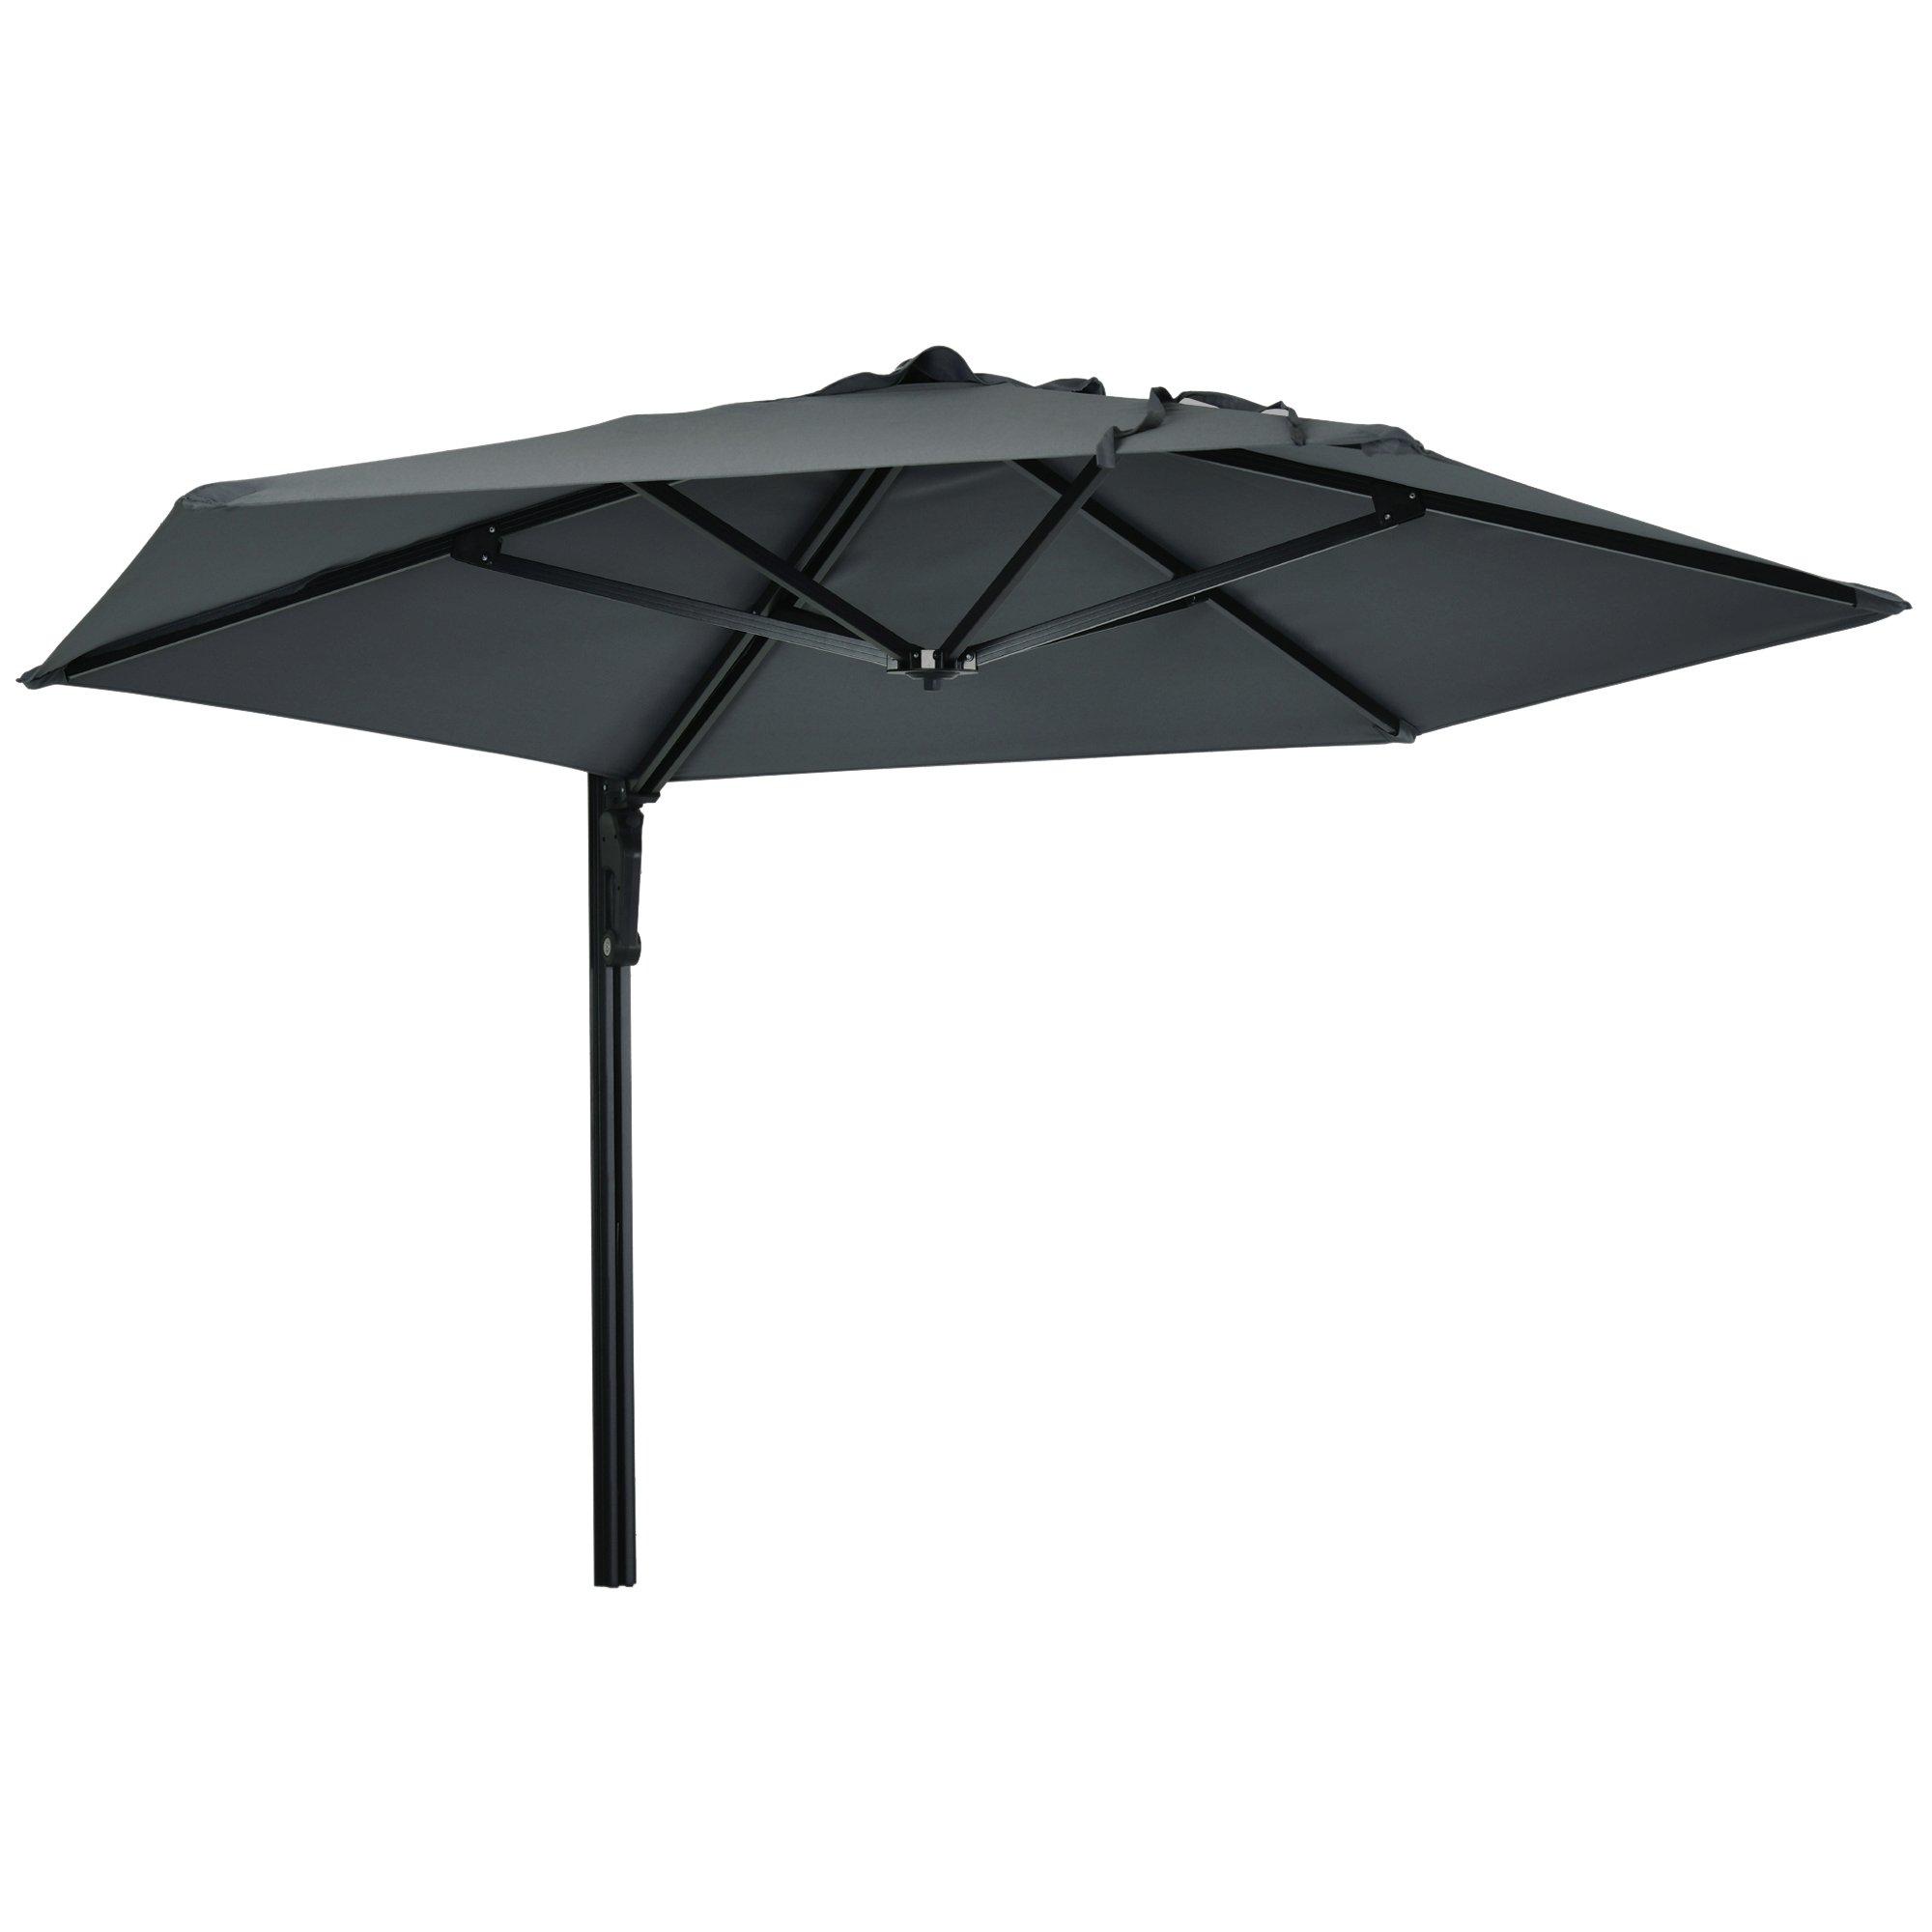 Wall Mounted Parasol Patio Umbrella with 180 Degree Rotatable Canopy